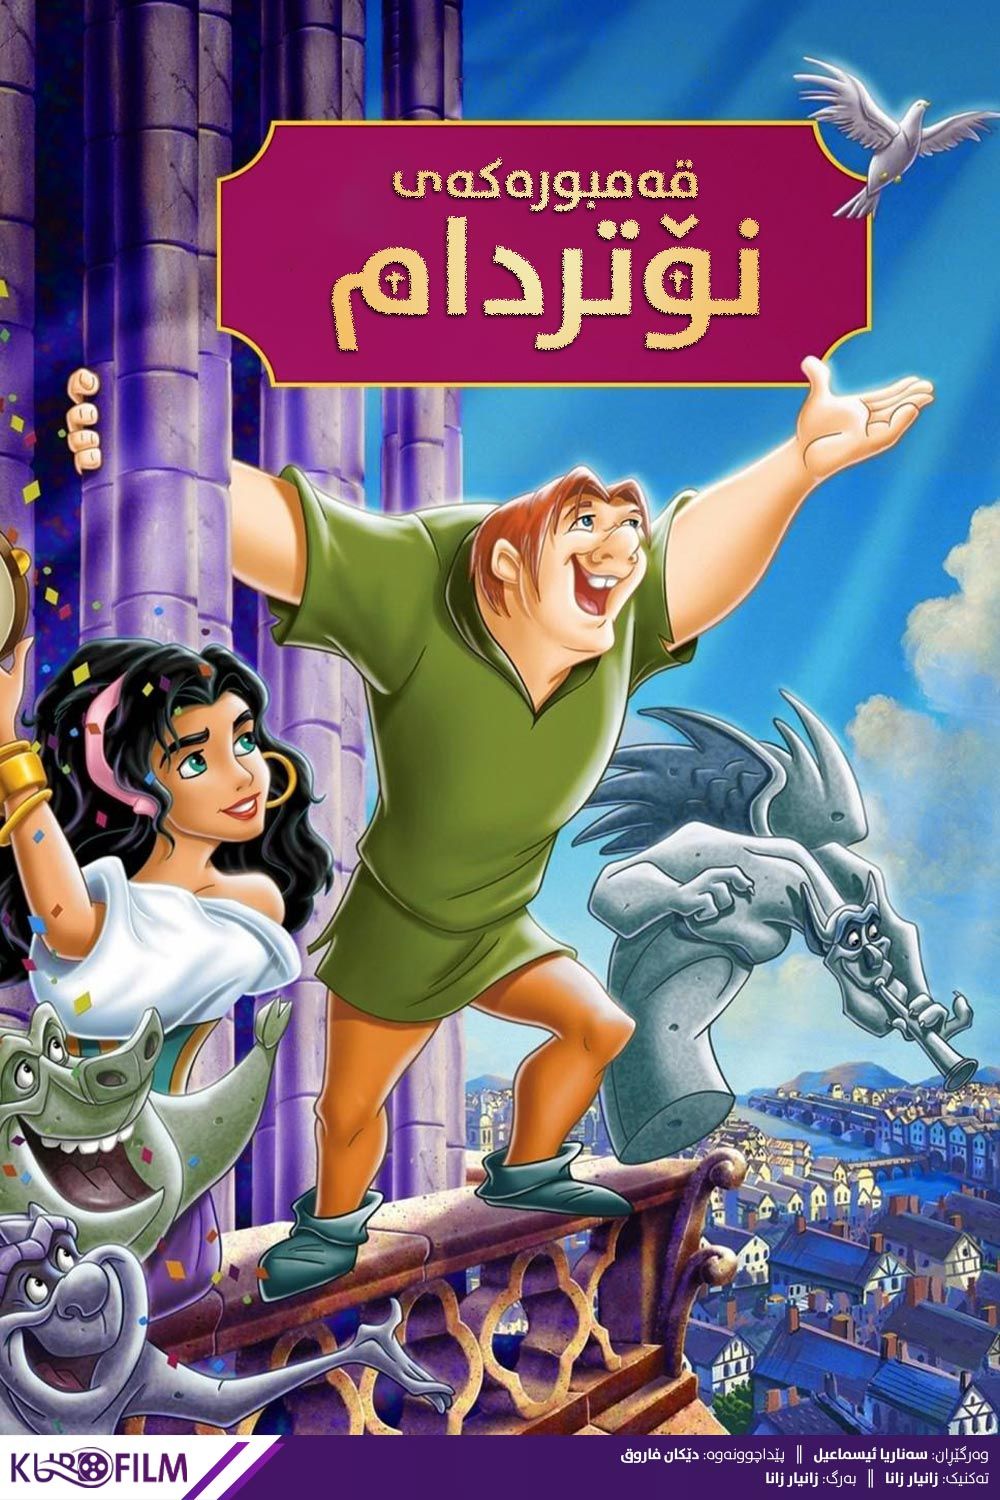 The Hunchback of Notre Dame (1996)